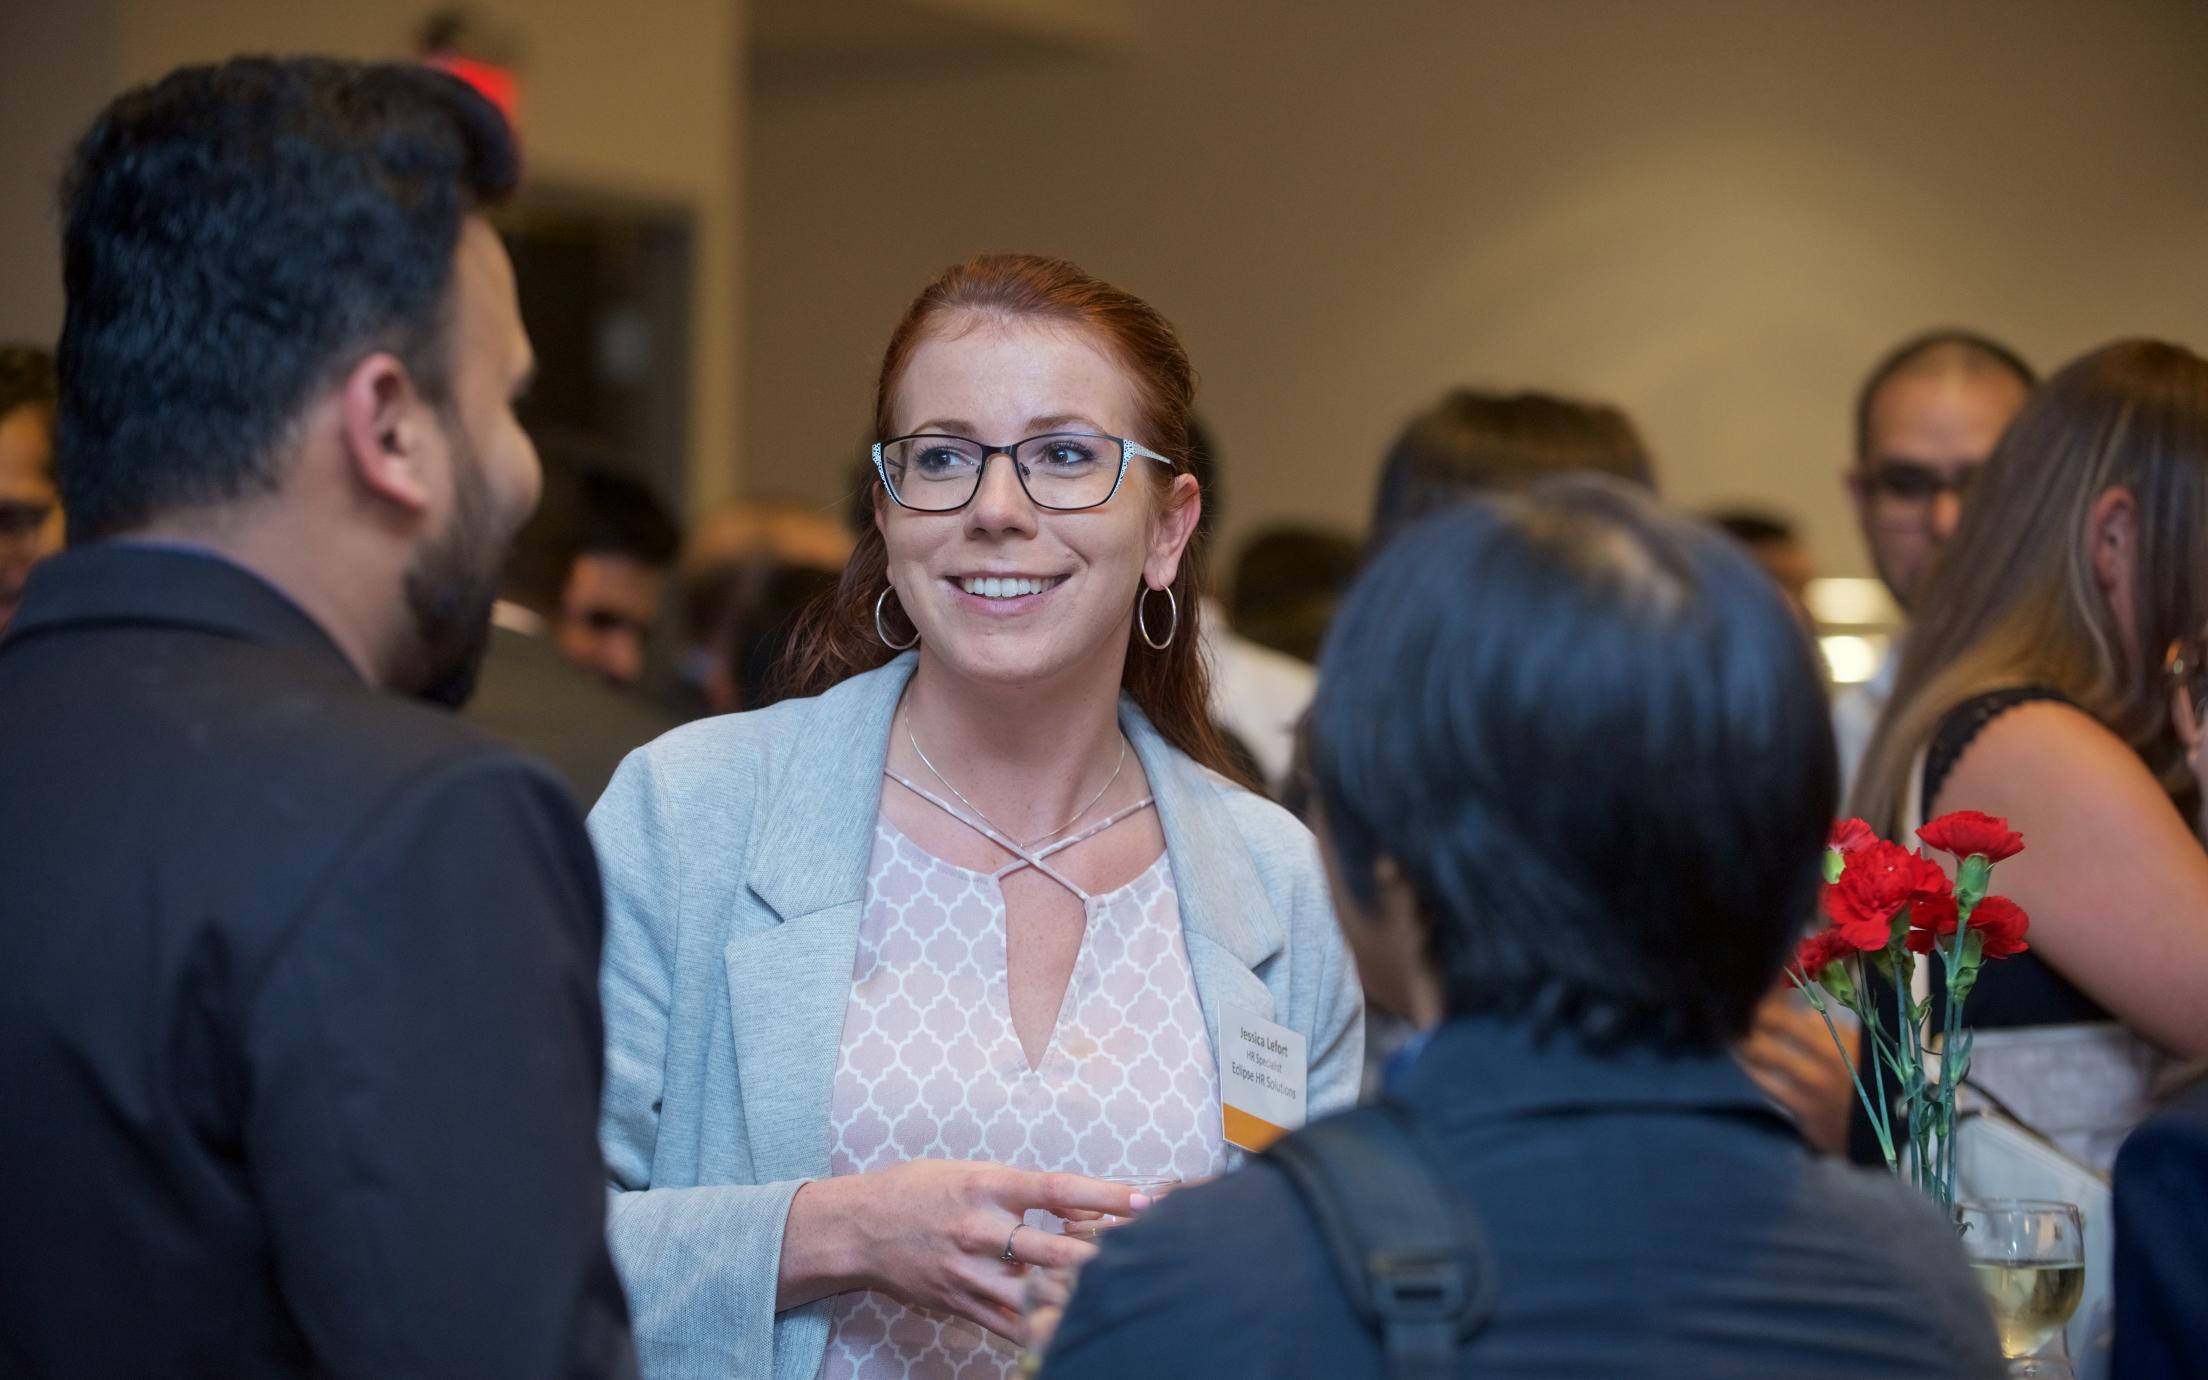 An employer talking to students at an MBA networking event